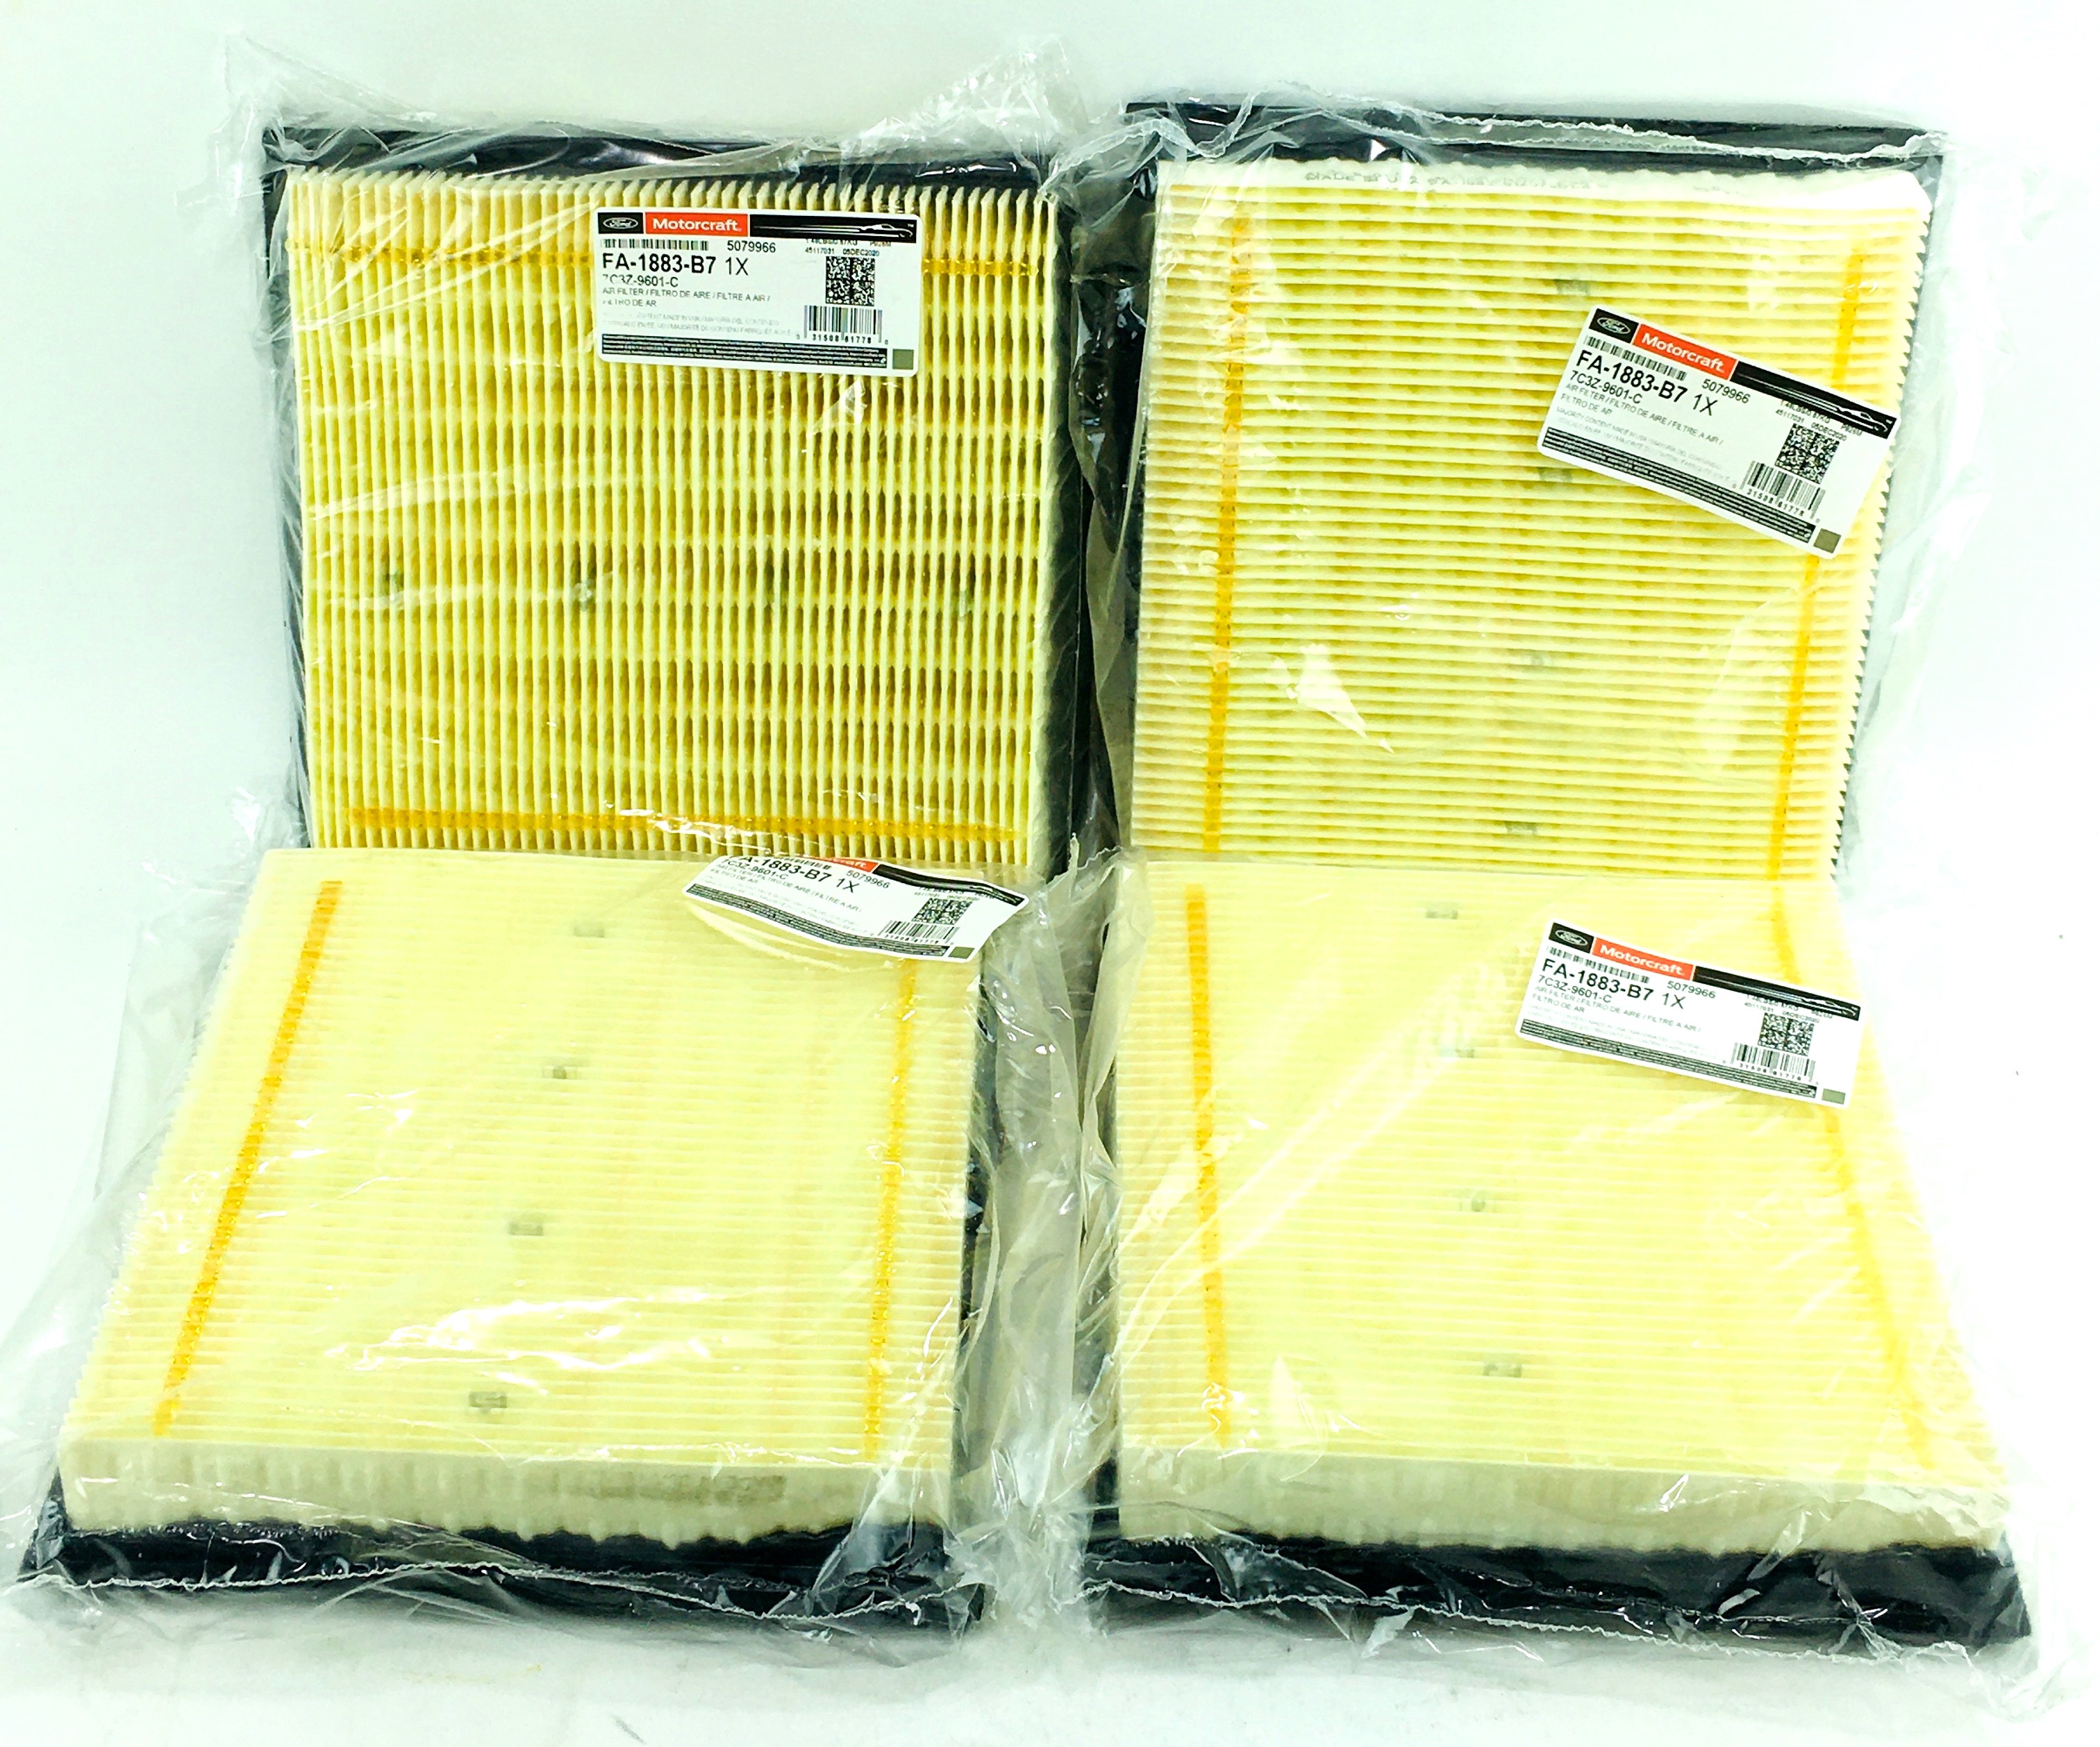 New OEM Motorcraft FA-1883-B7 Ford 7C3Z9601A Genuine Air Filter Free Shipping - image 1